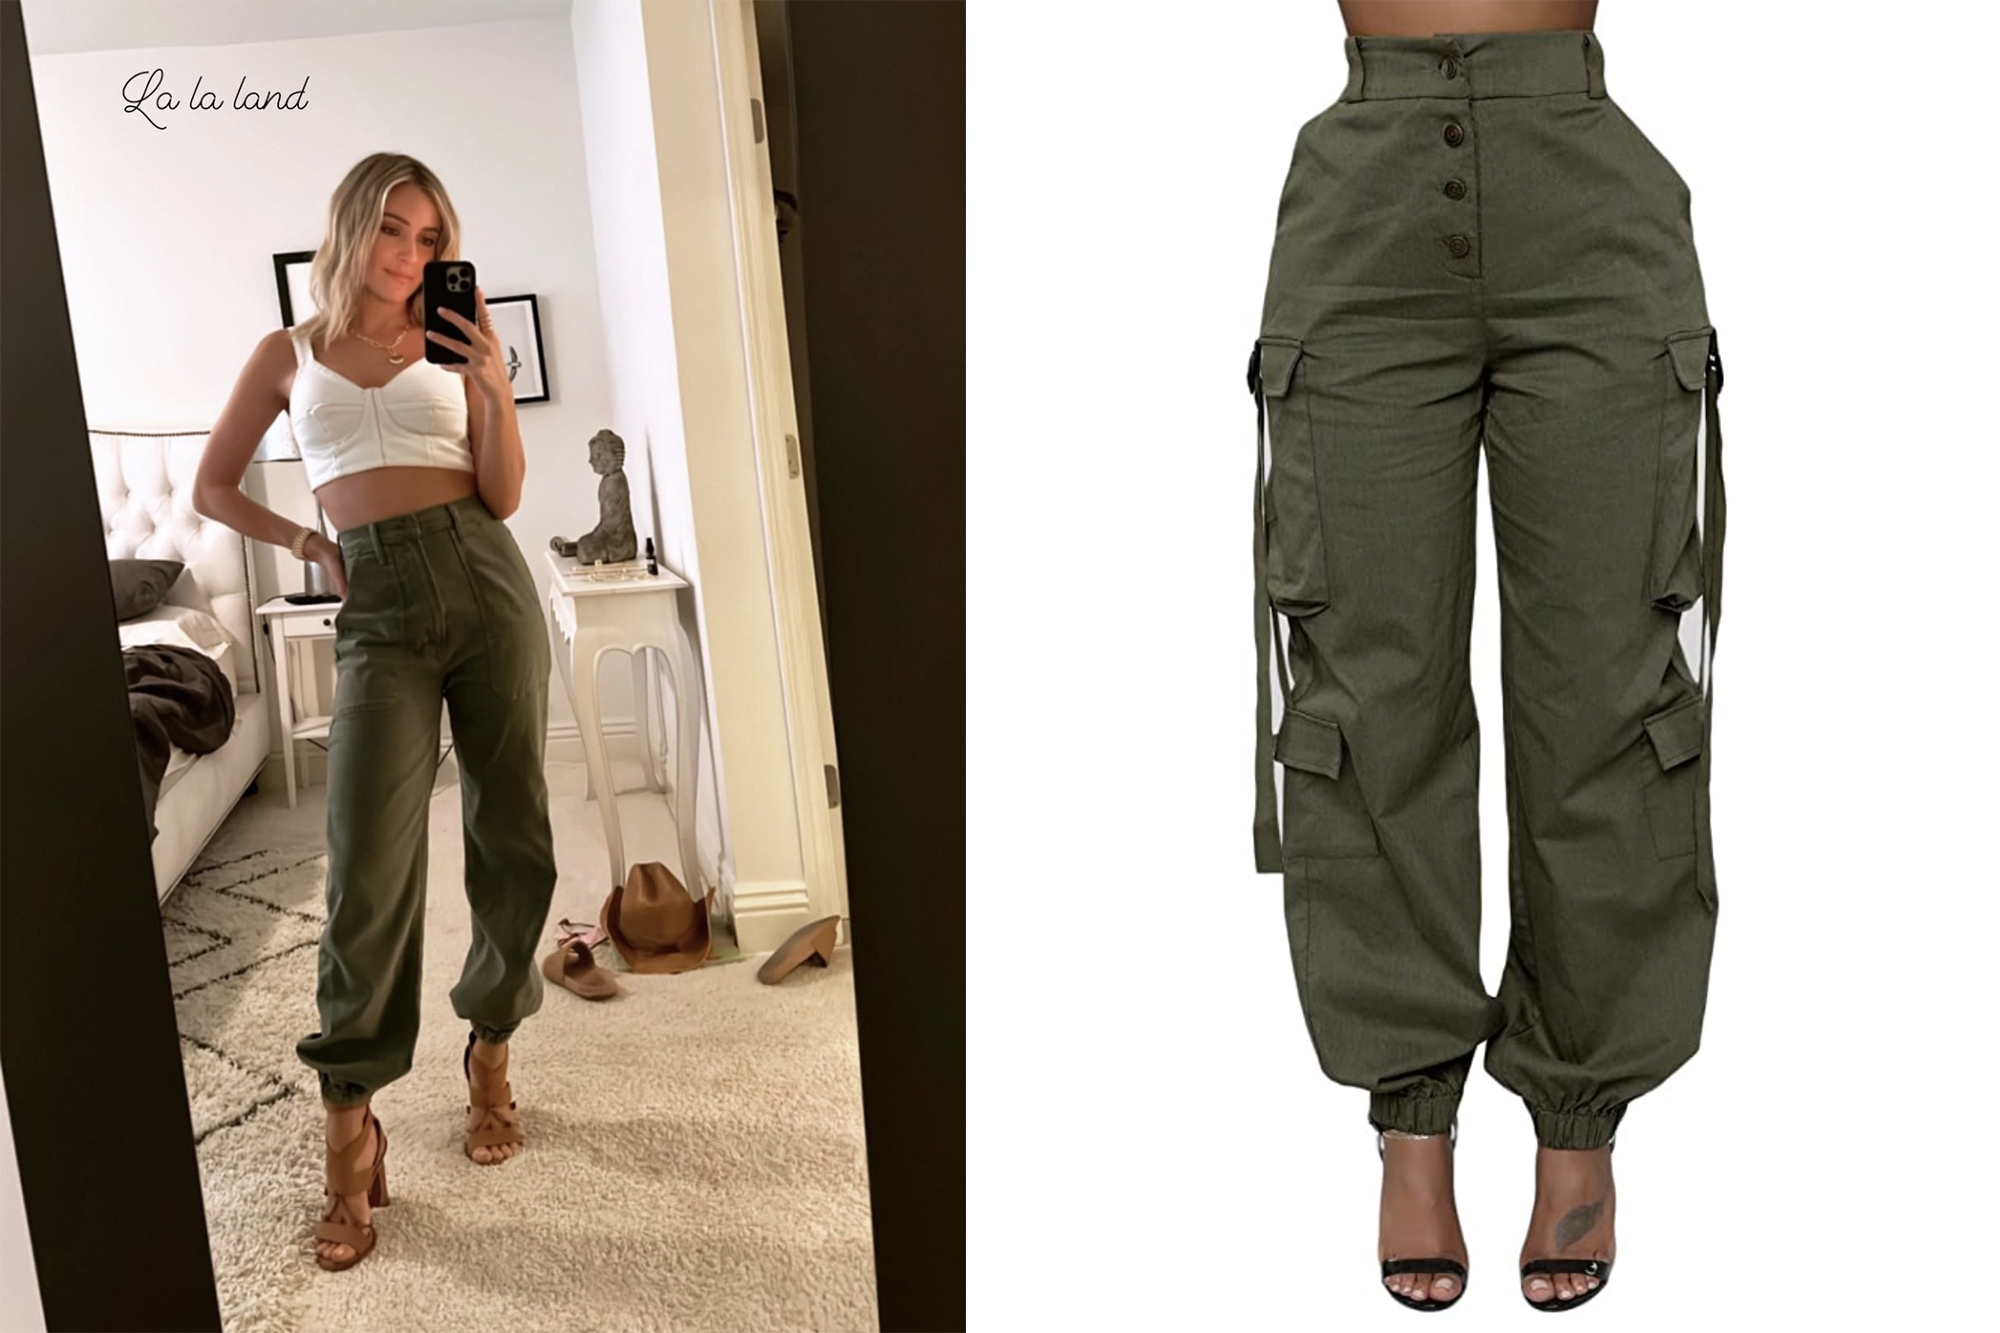 Camouflage CARGO Pants With Applications and Rhinestones, Women's Military  Pants, Hand-painted Camo Pants in Unique Pieces, Army Style Pants - Etsy